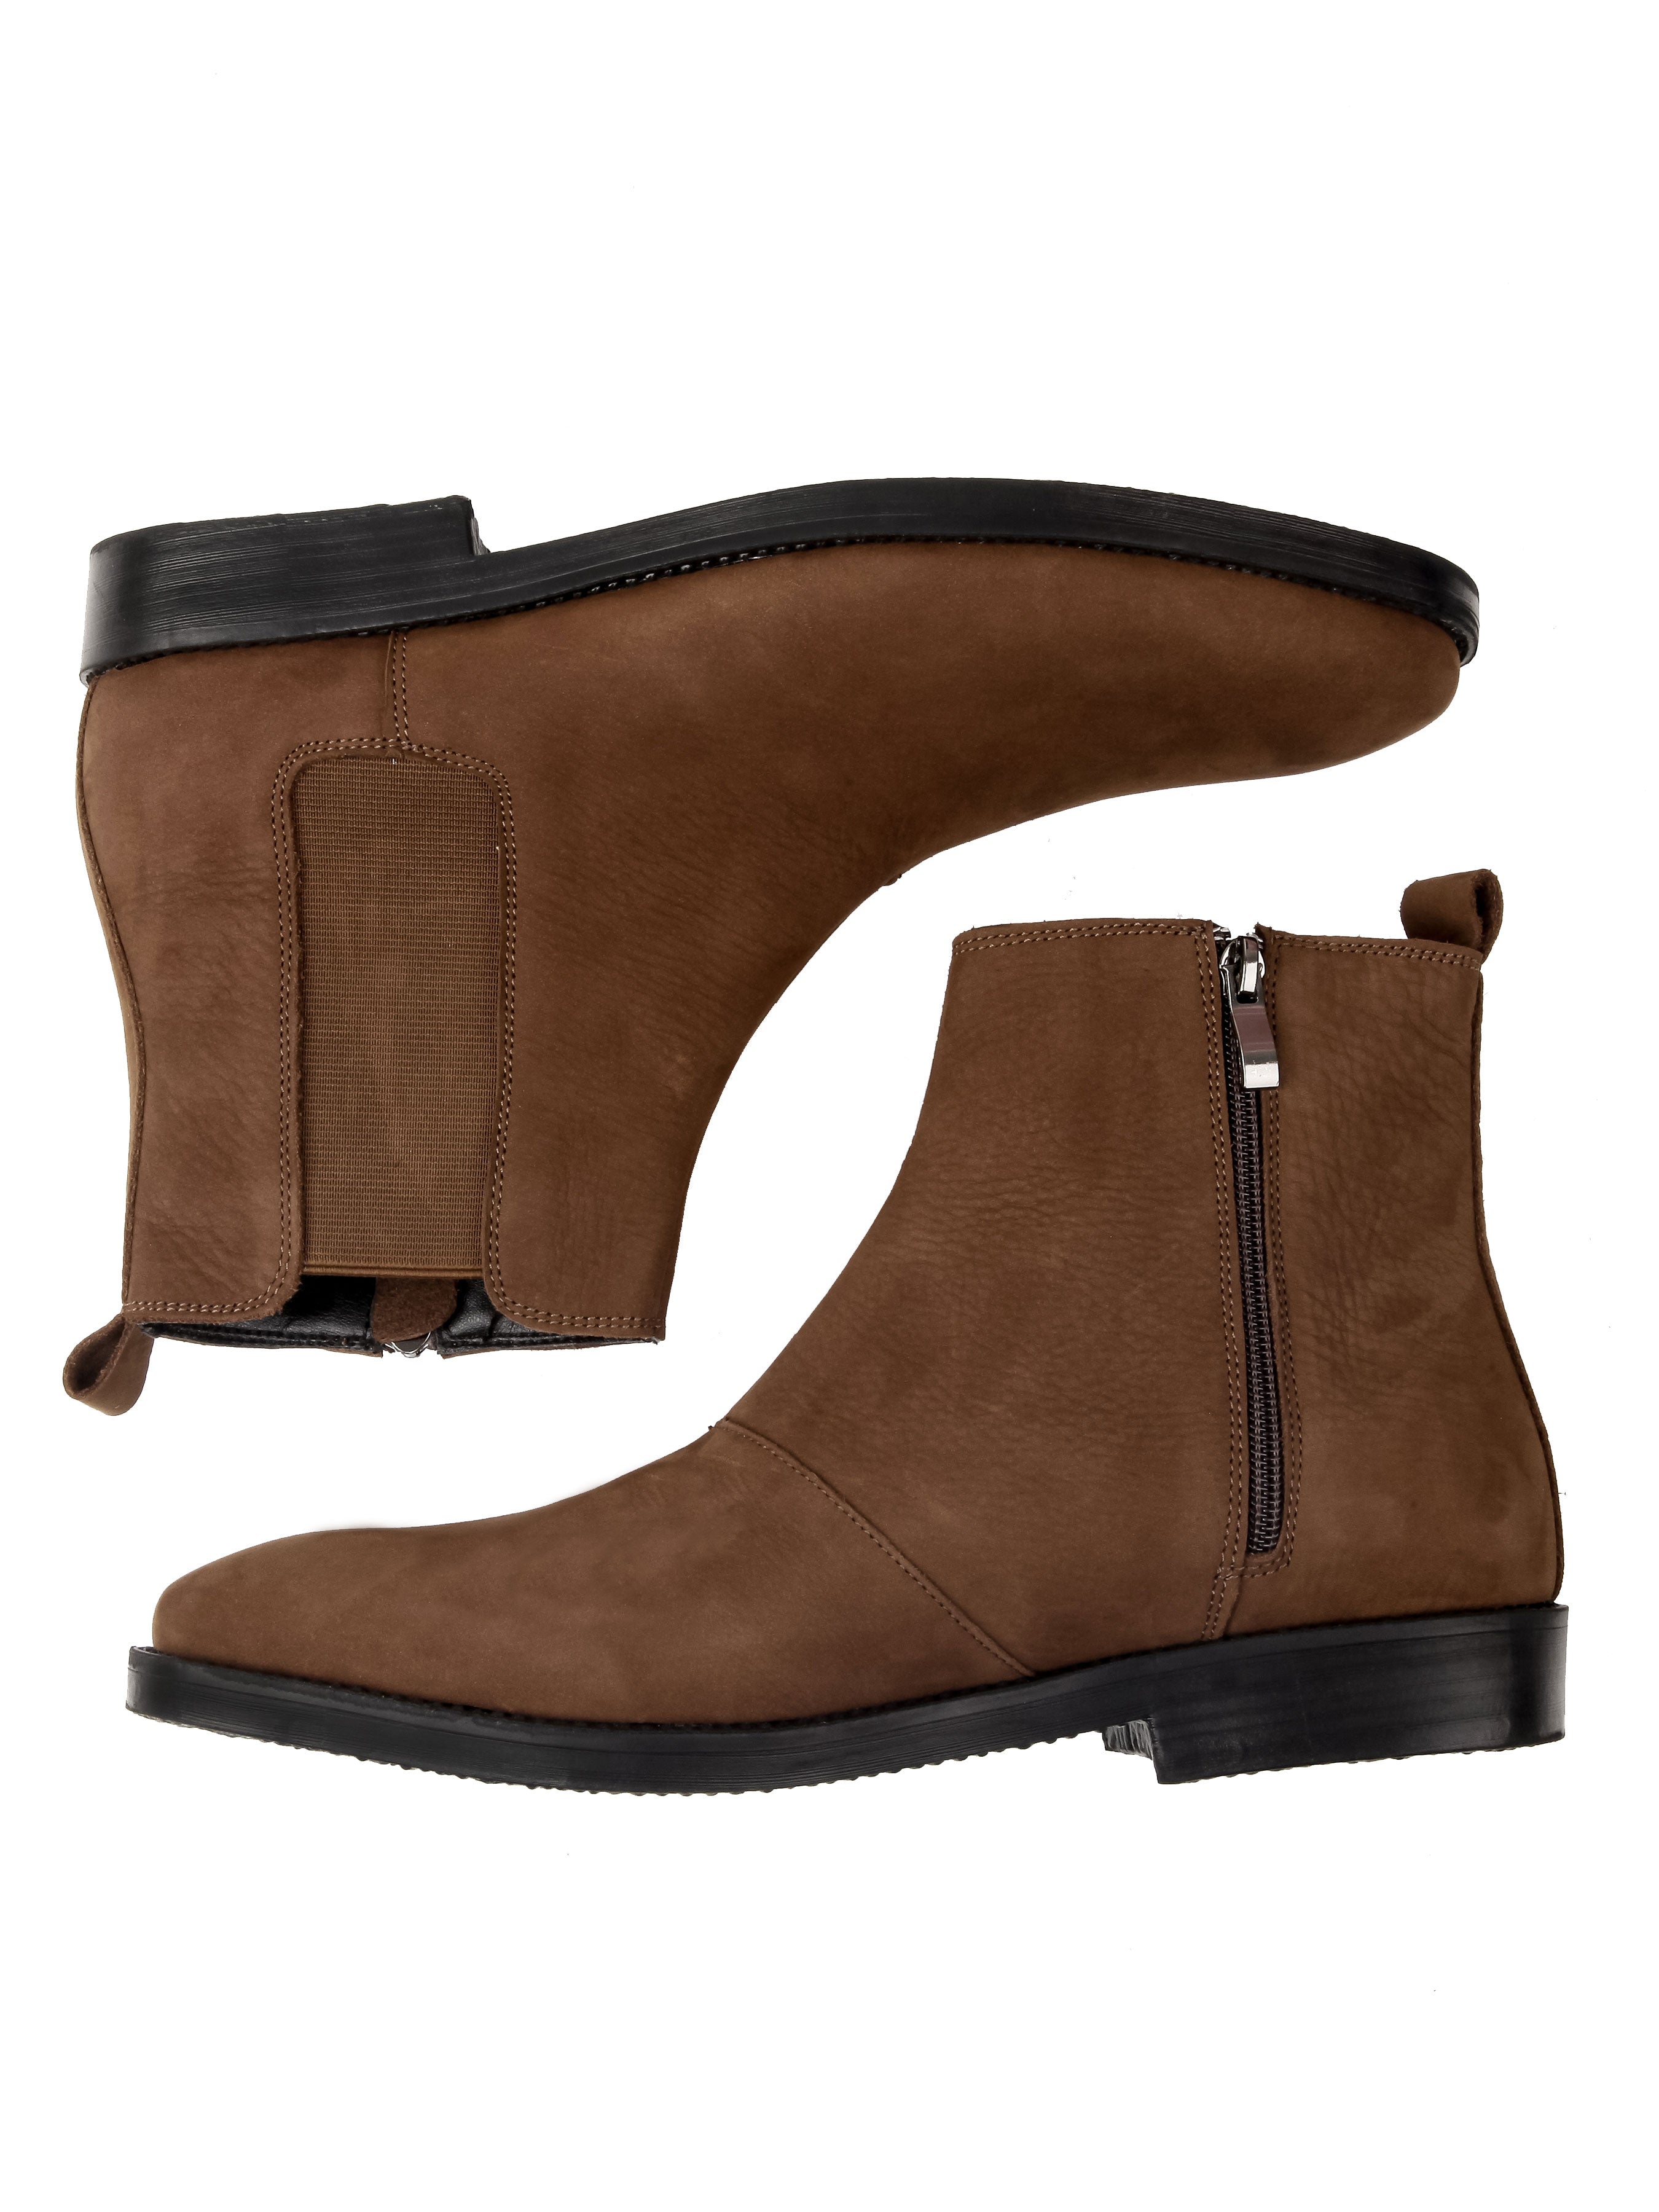 Chelsea Boots With Zipper - Brown Nubuck Leather (Crepe Sole) - Zeve Shoes